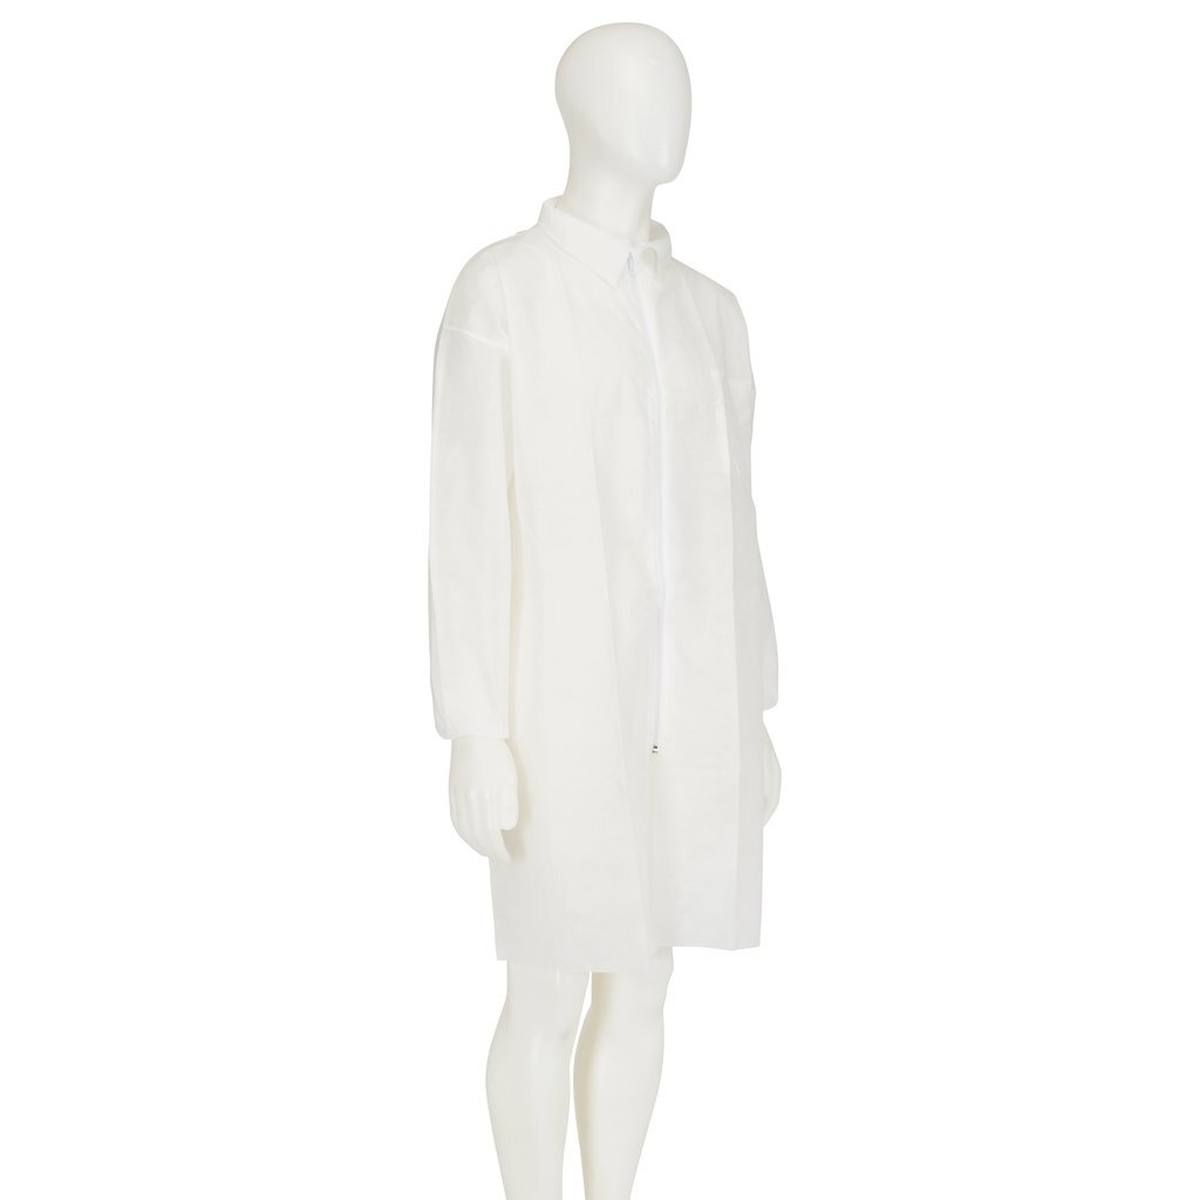 3M 4400 Coat, white, size 2XL, material 100% polypropylene, breathable, very light, with zip